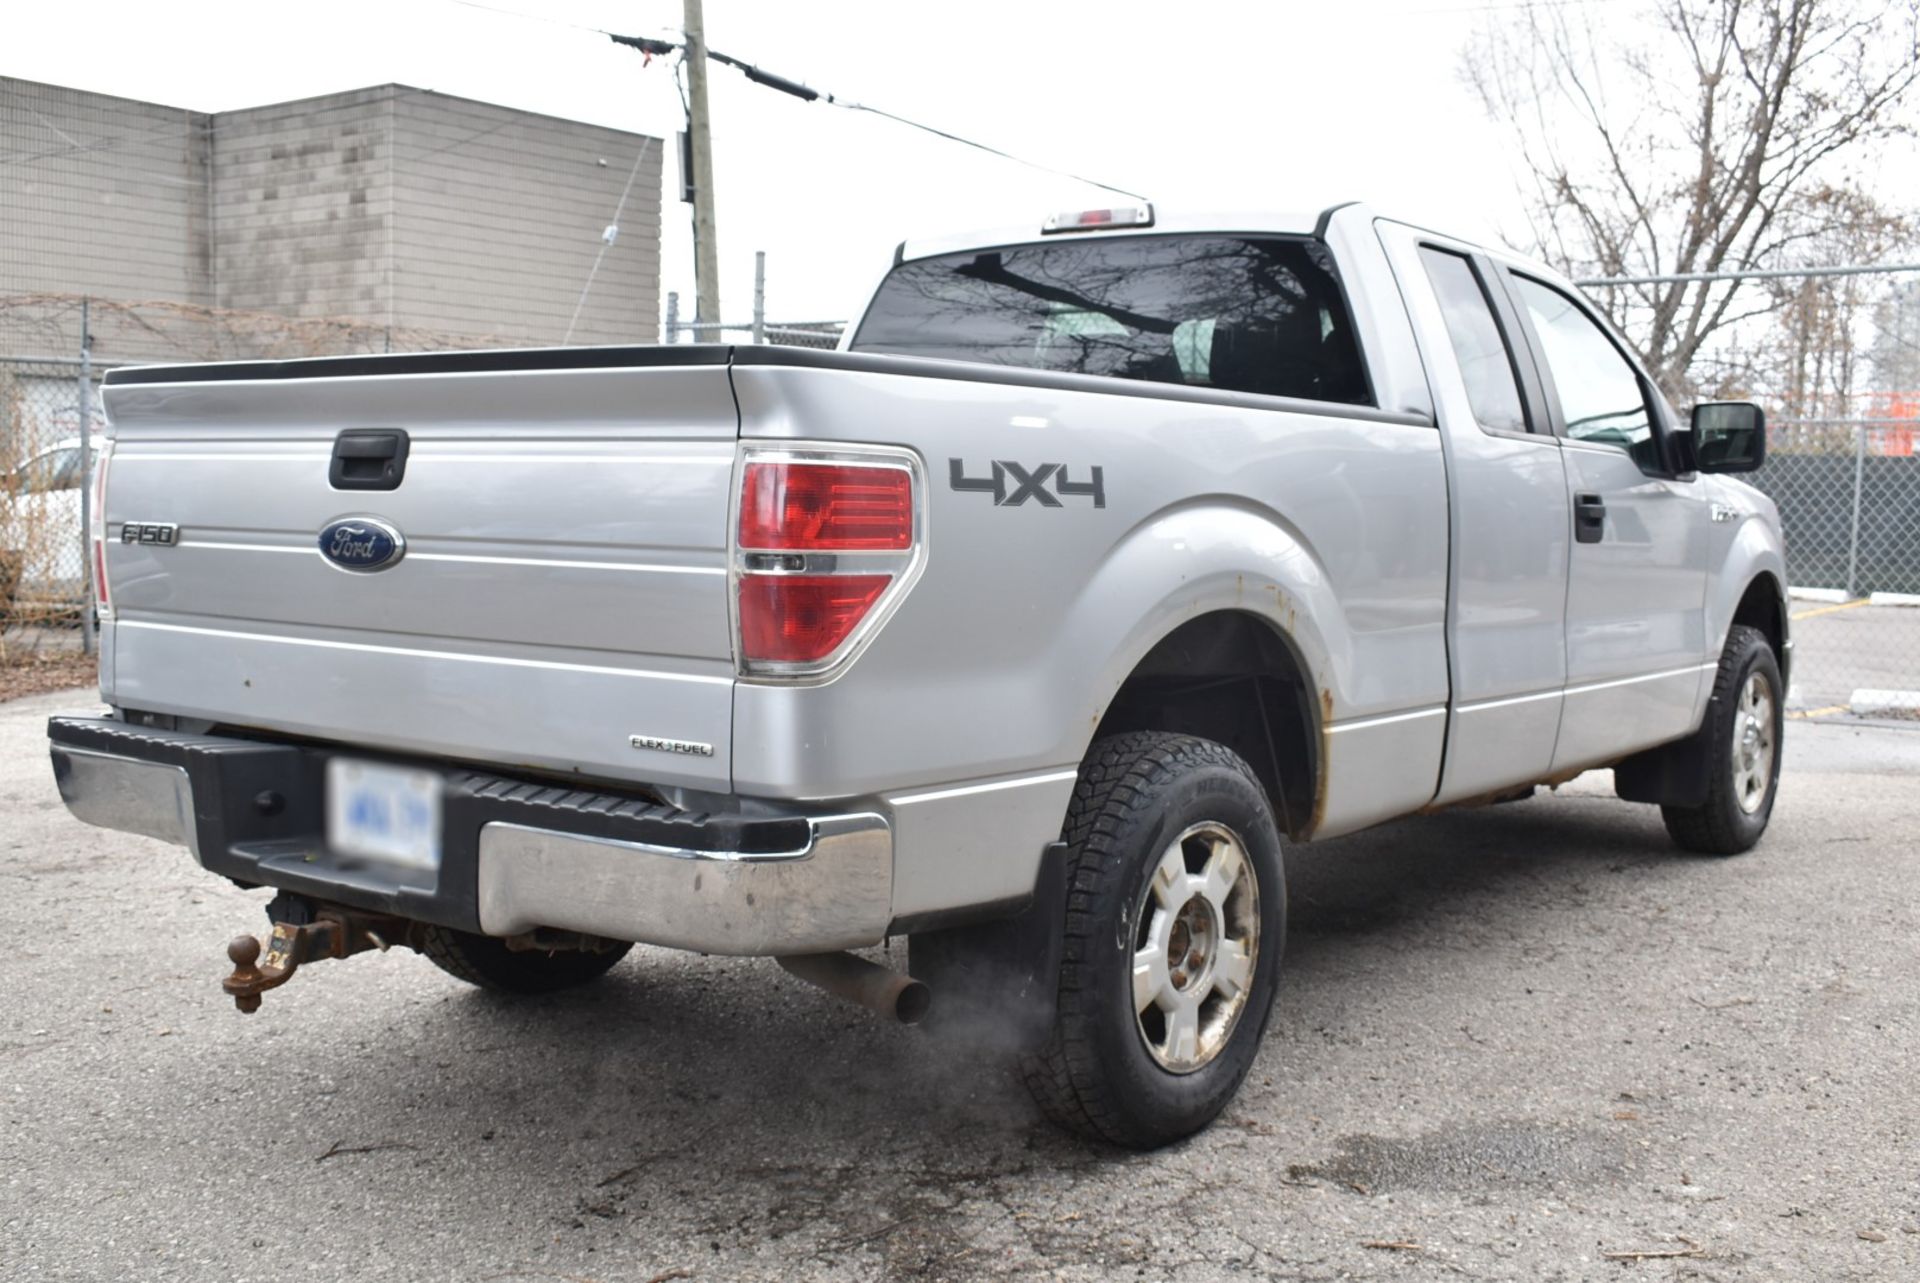 FORD (2014) F150XLT EXTENDED CAB PICKUP TRUCK WITH 3.7 LITER V6 ENGINE, 4X4, AUTO TRANSMISSION, - Image 4 of 13